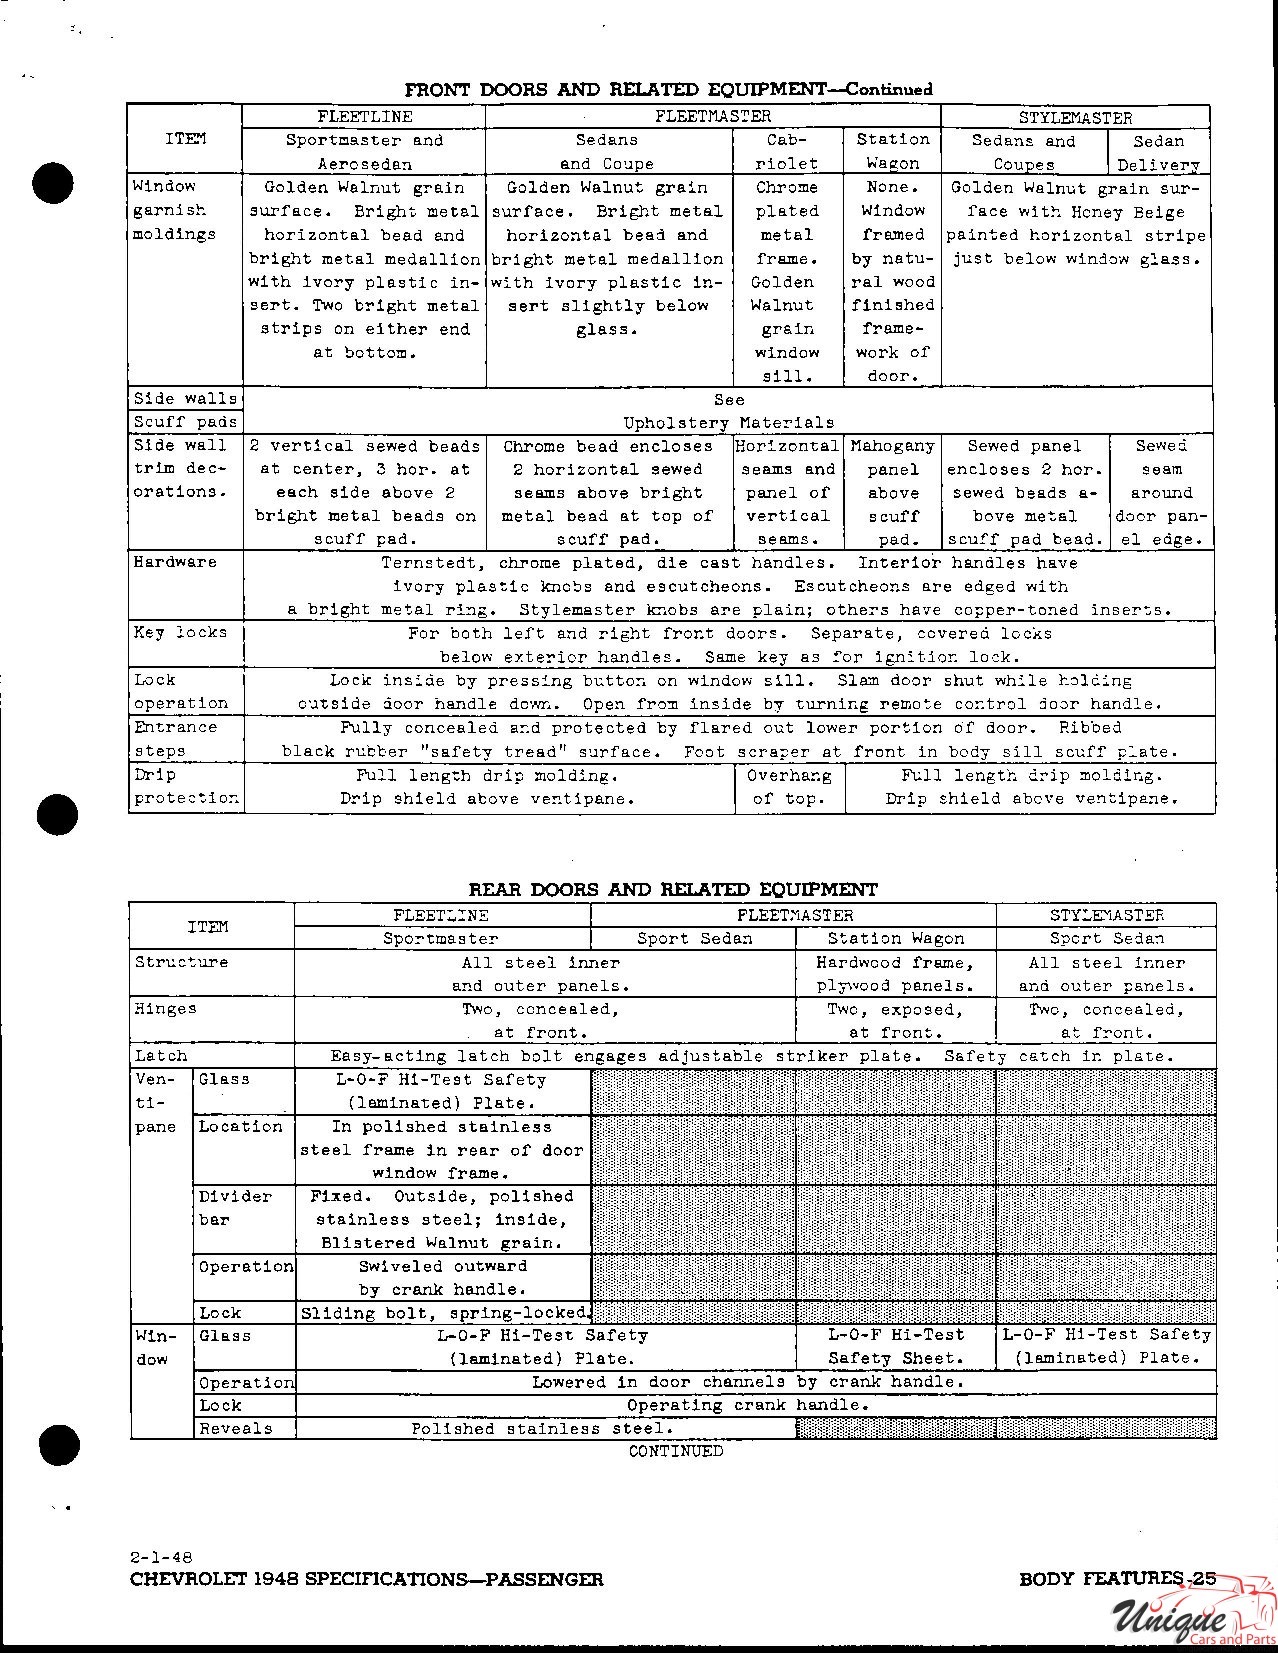 1948 Chevrolet Specifications Page 31